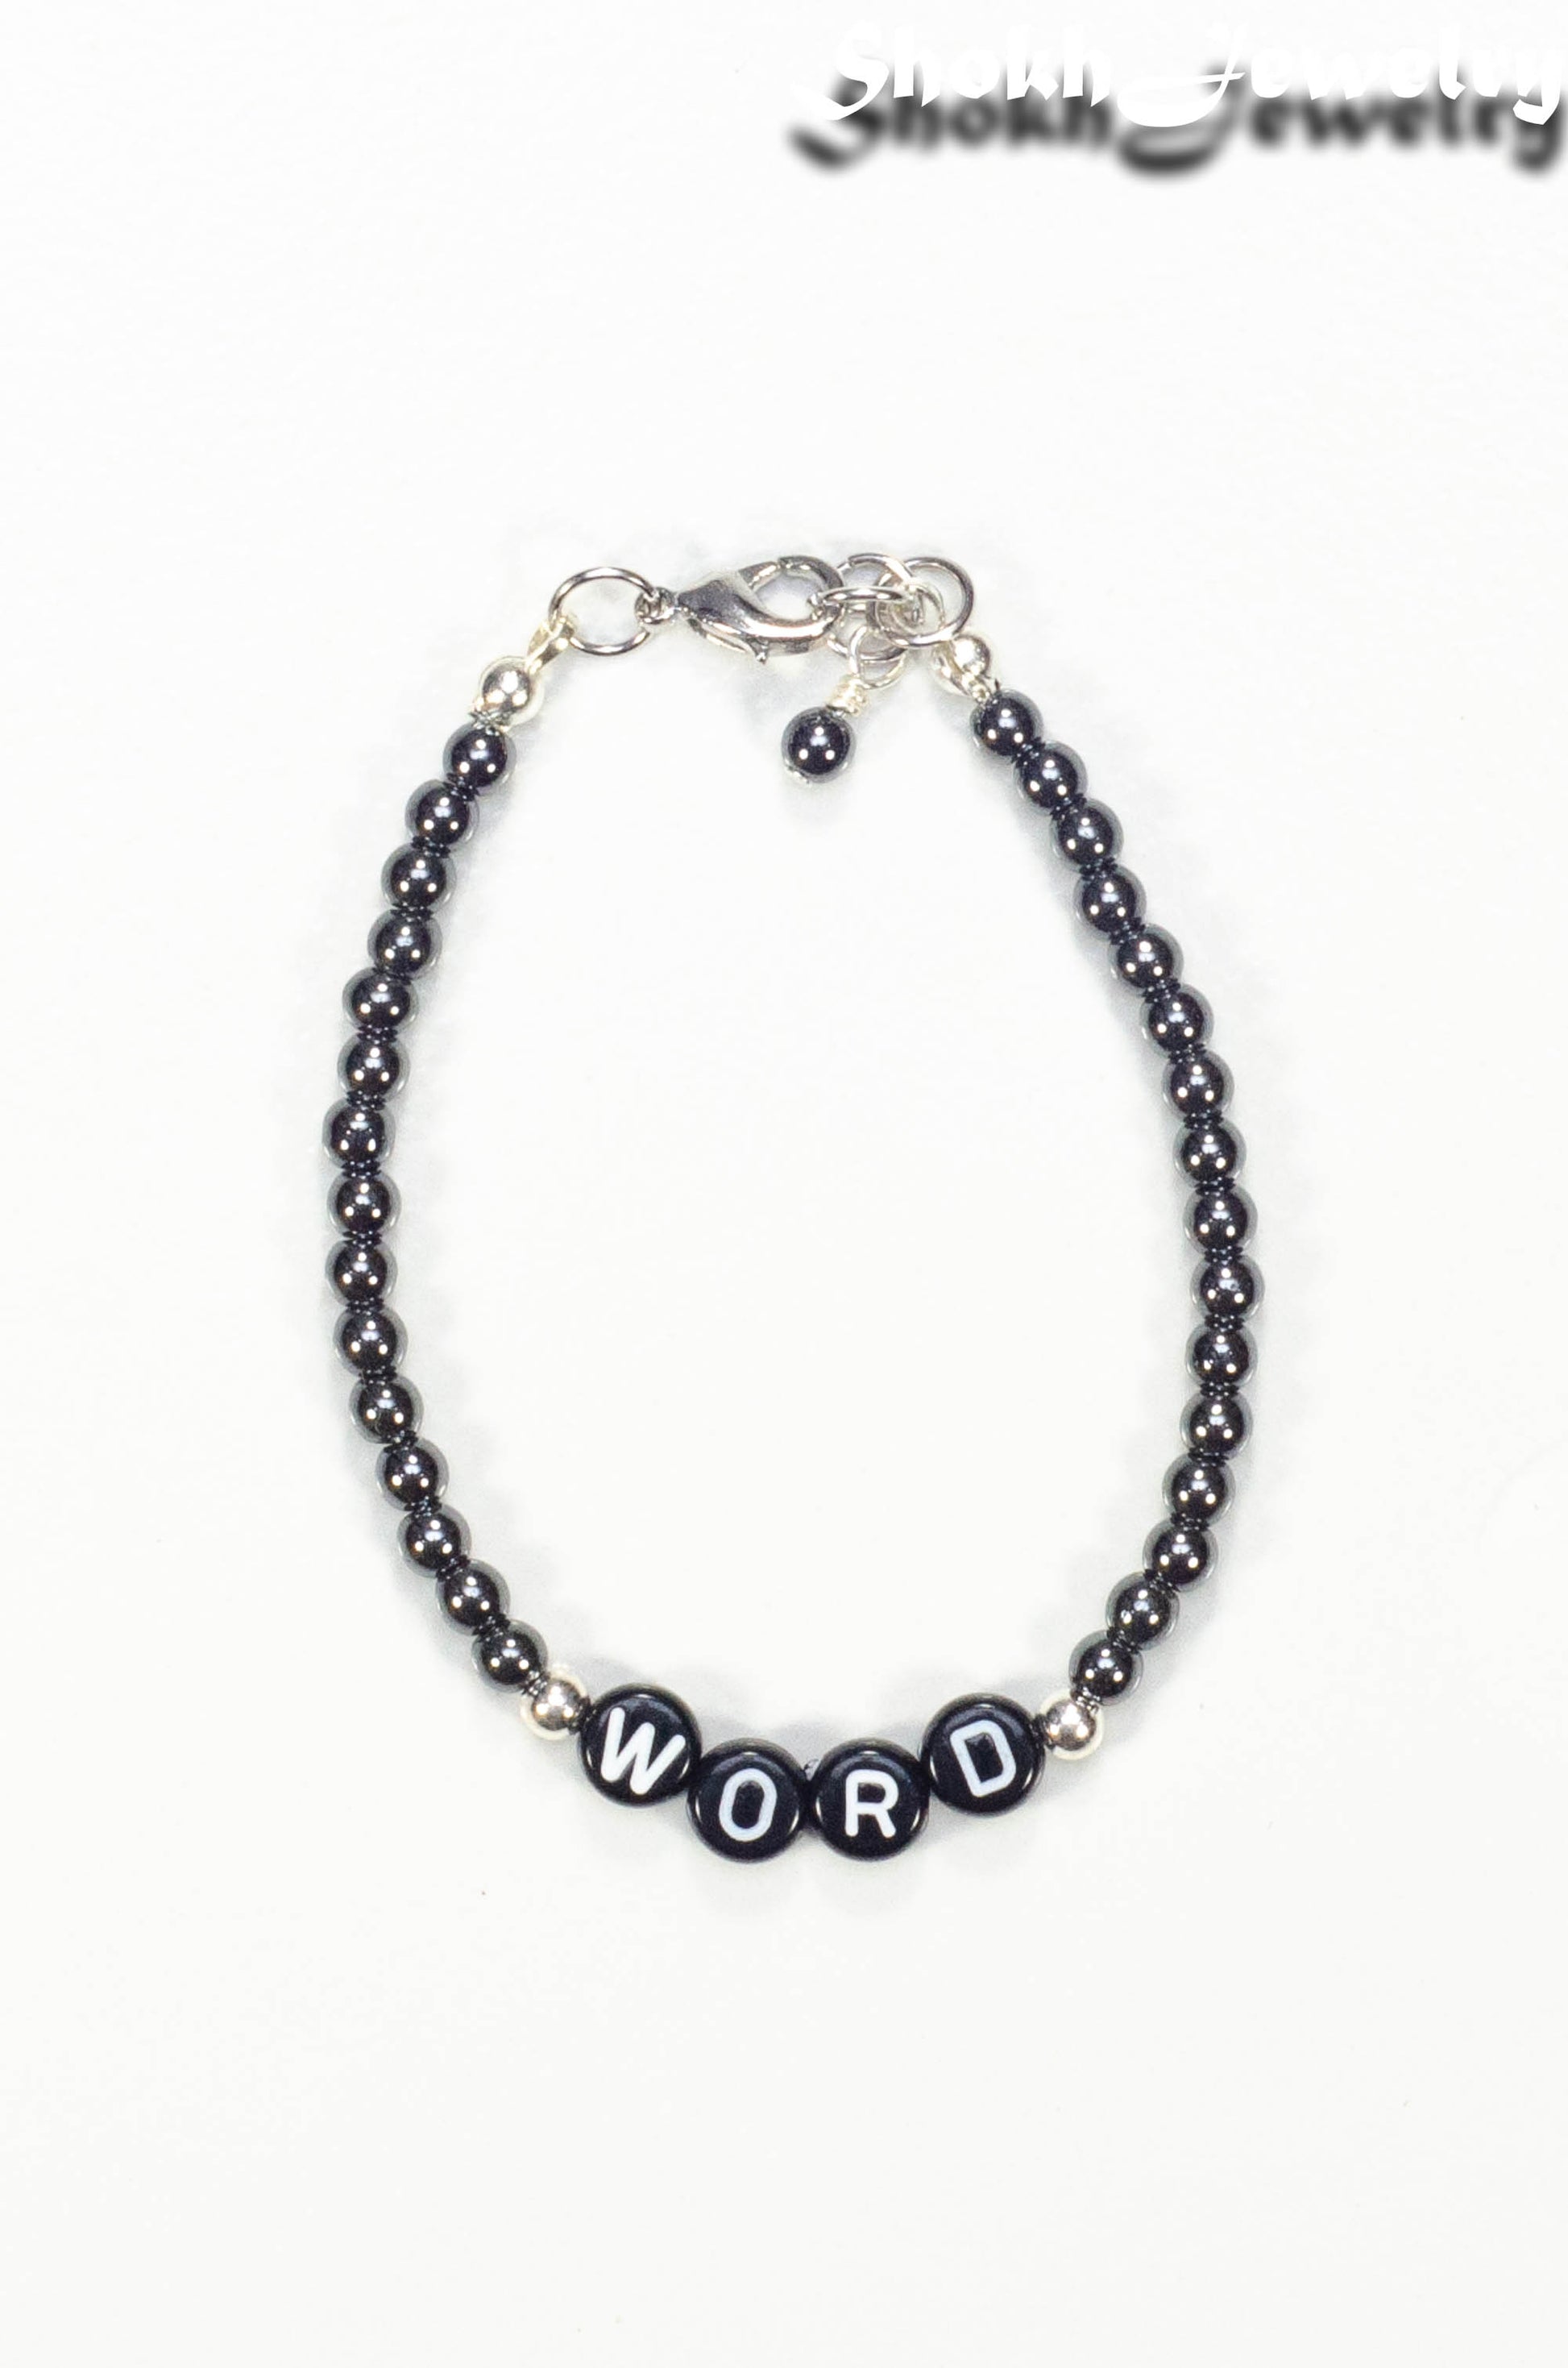 Top view of Personalized Hematite Stone Bracelet with Clasp.